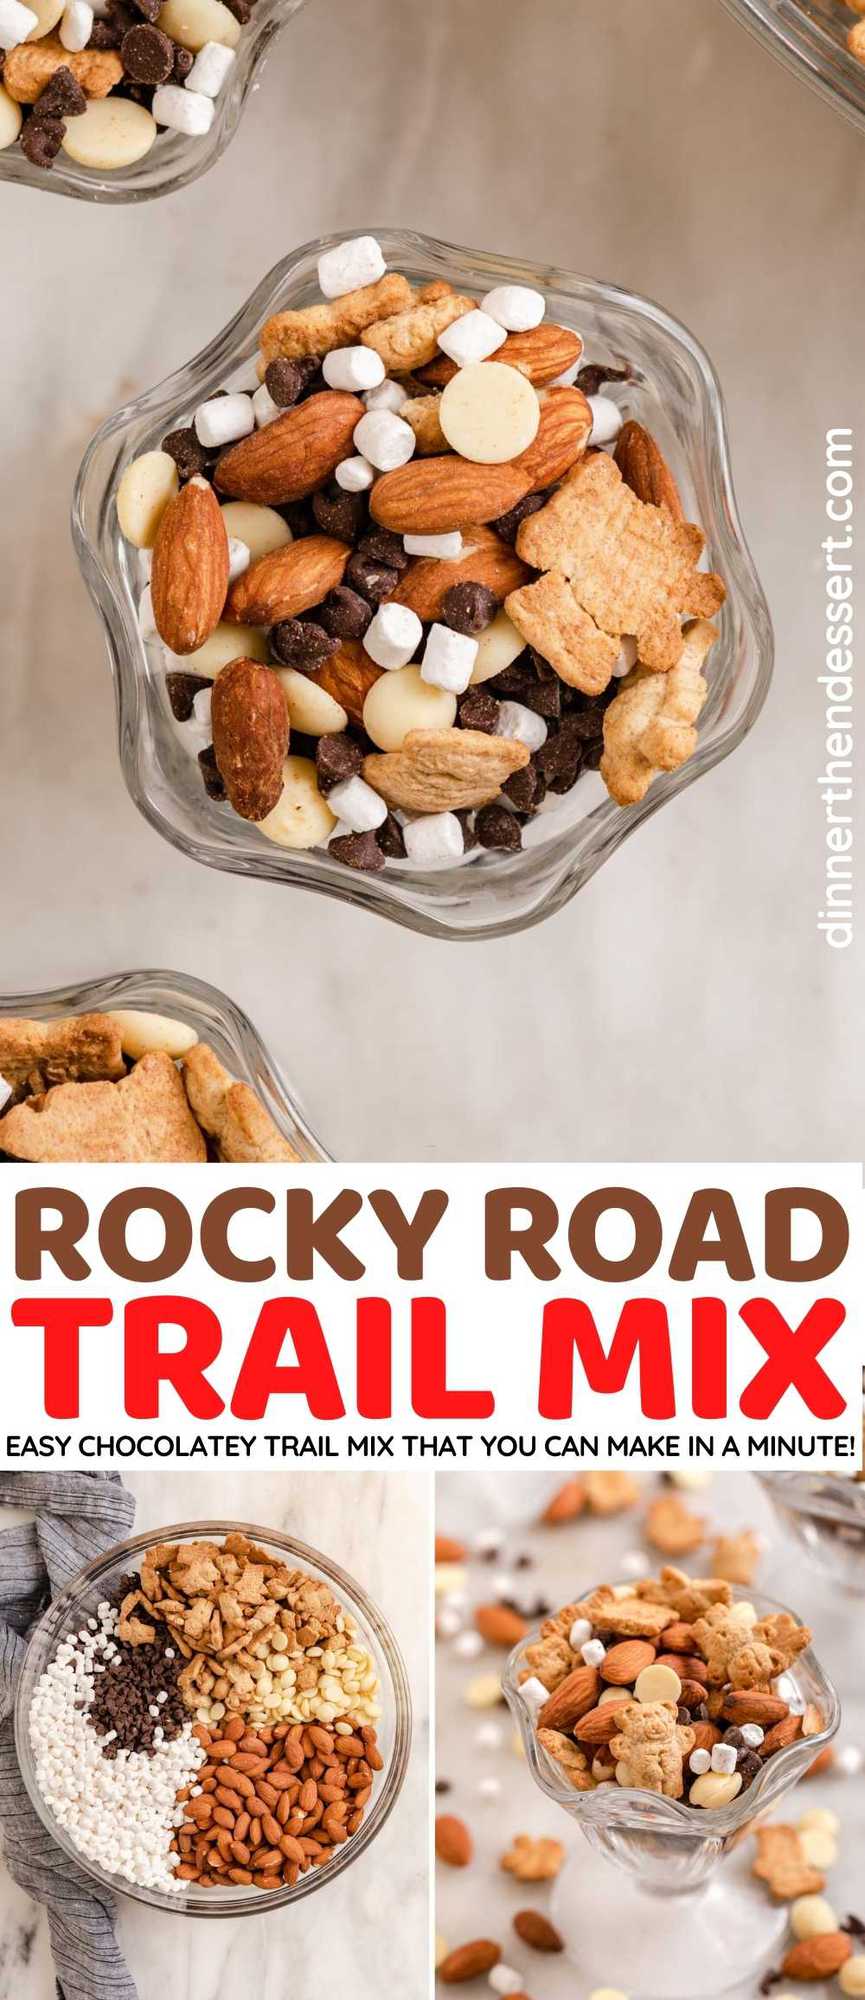 Rocky Road Trail Mix collage